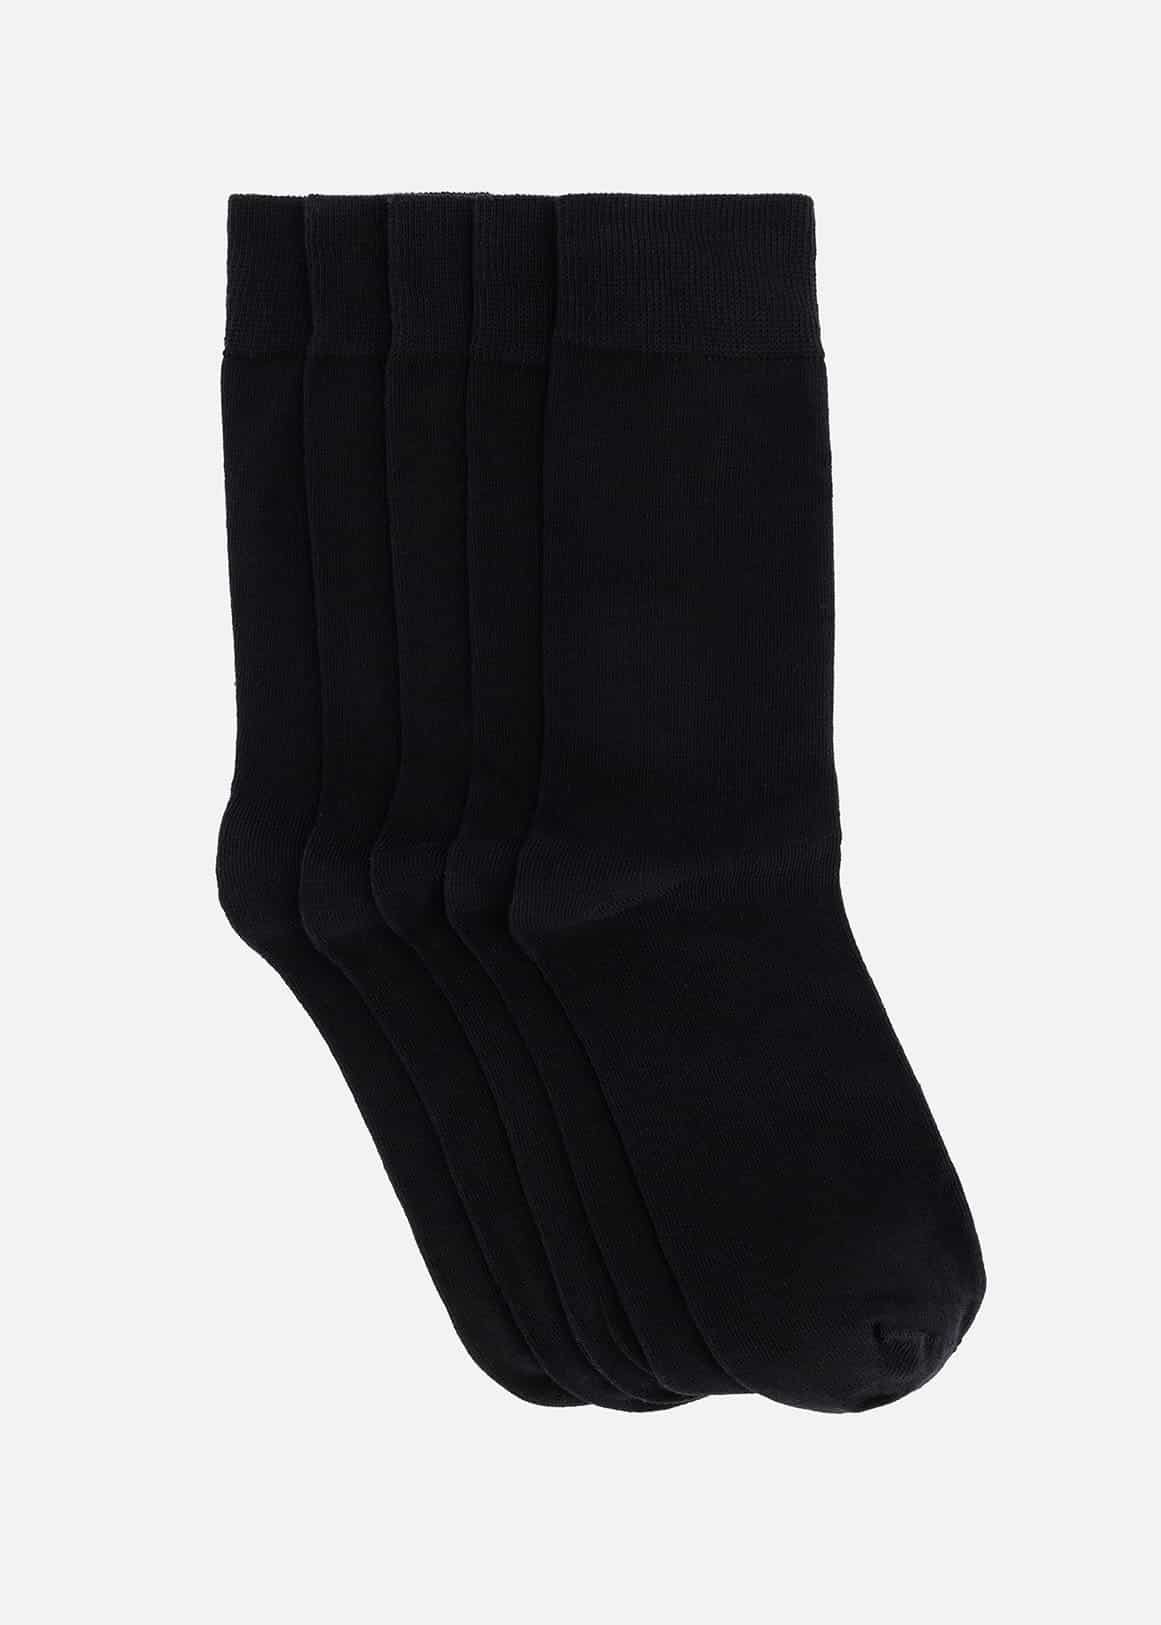 AW23 5PK PLAIN BLACK - Woolworths Mauritius Online